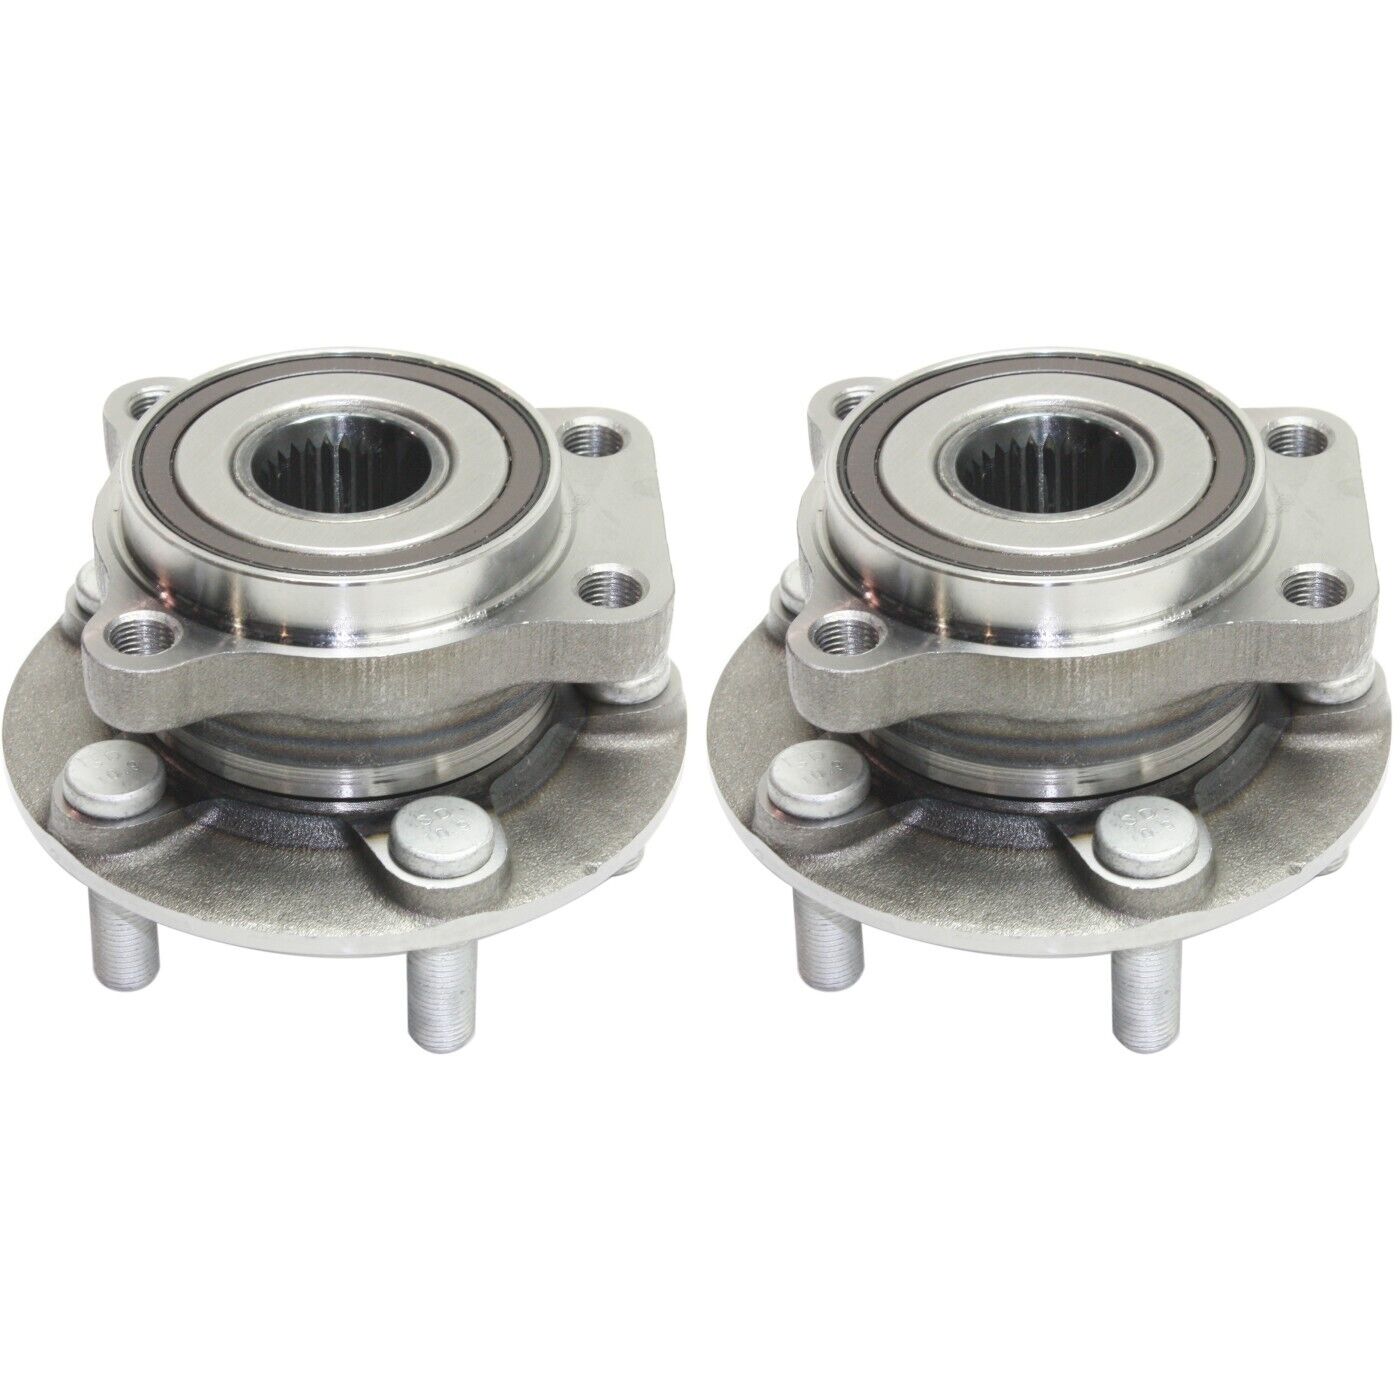 Front Wheel Hub Bearing Set For 2004-14 Impreza 2005-16 Outback With ABS Encoder